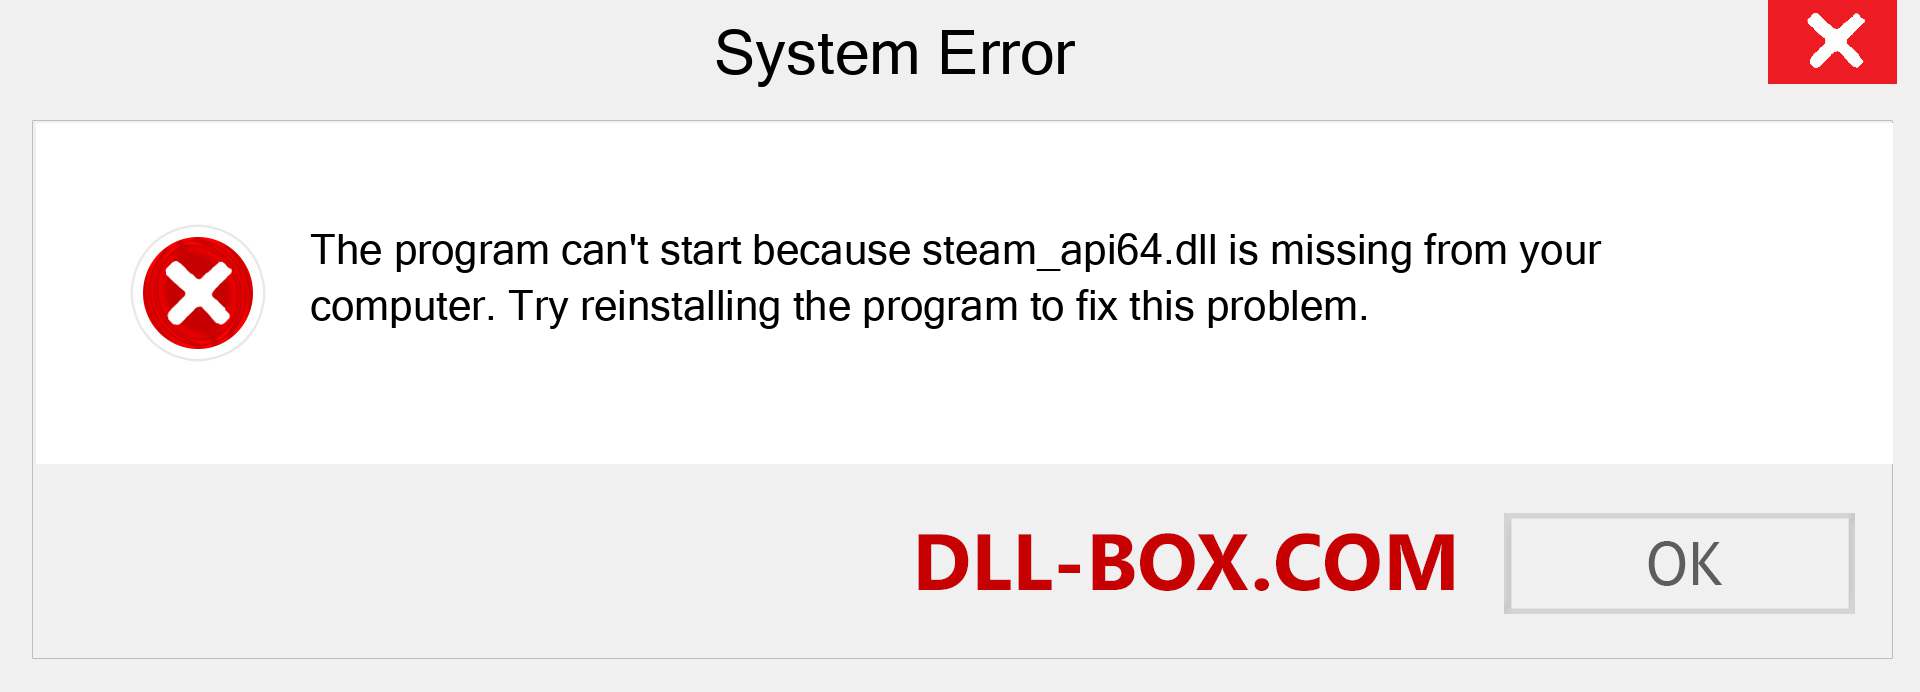  steam_api64.dll file is missing?. Download for Windows 7, 8, 10 - Fix  steam_api64 dll Missing Error on Windows, photos, images